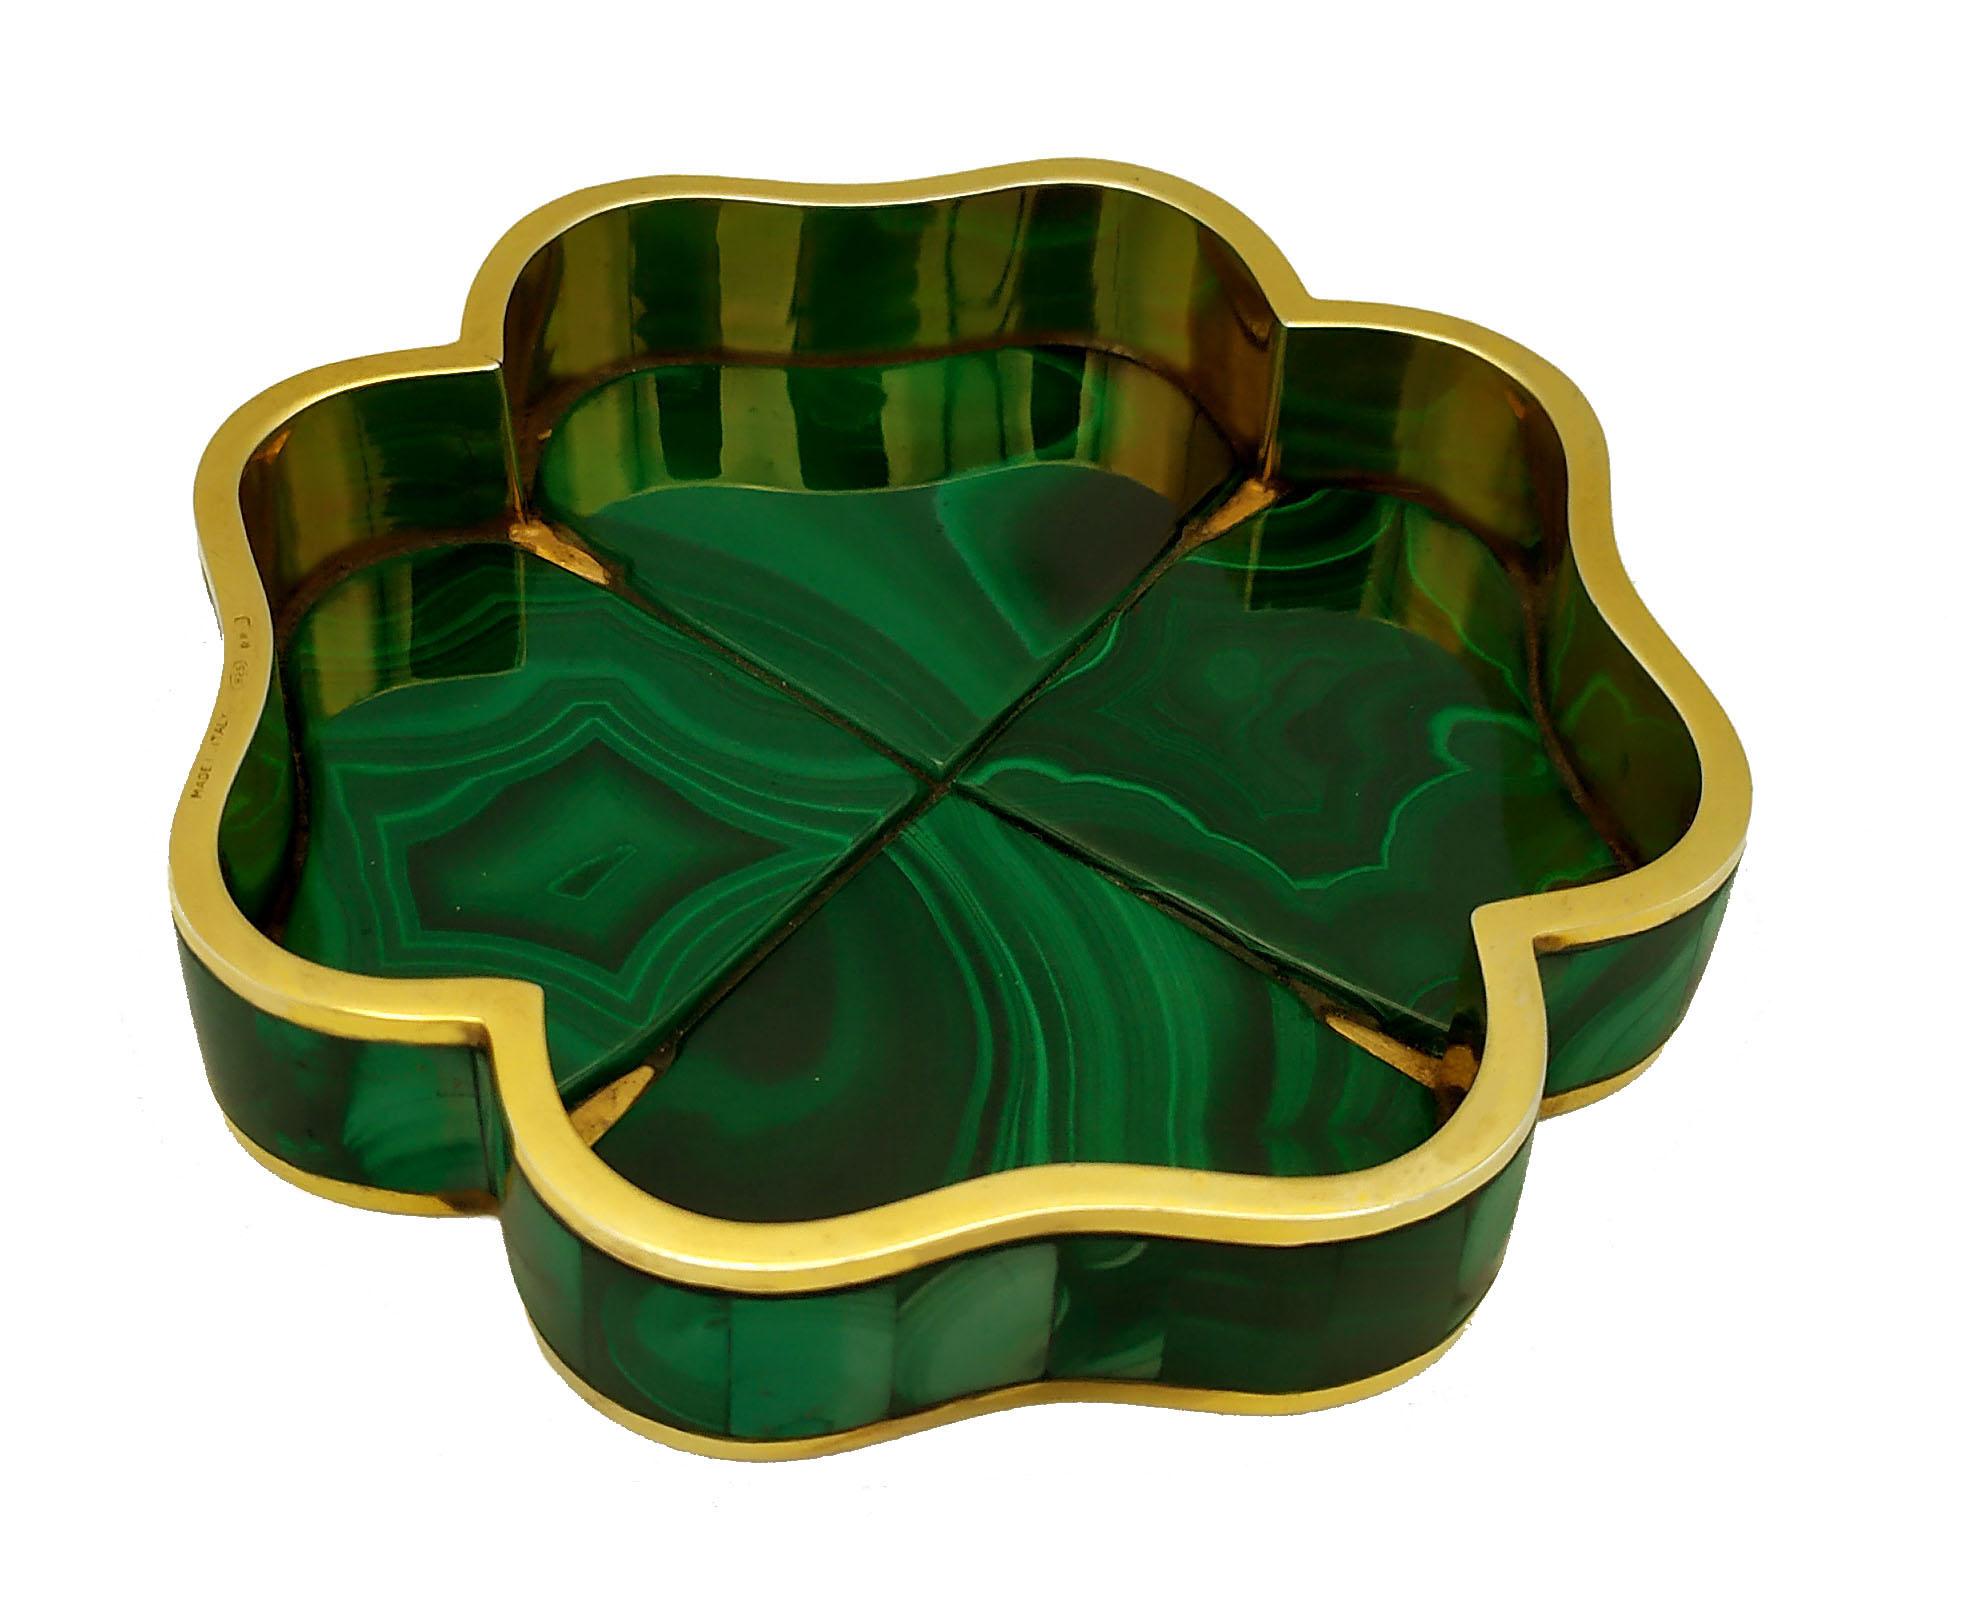 Table ashtray in the shape of a four-leaf clover with structure in 925/1000 sterling Silver gold plated and external and internal lining in real malachite stone. Dimensions cm. 12 x 12 x 2. Silver weight gr. 218. Designed by Giorgio Salimbeni in